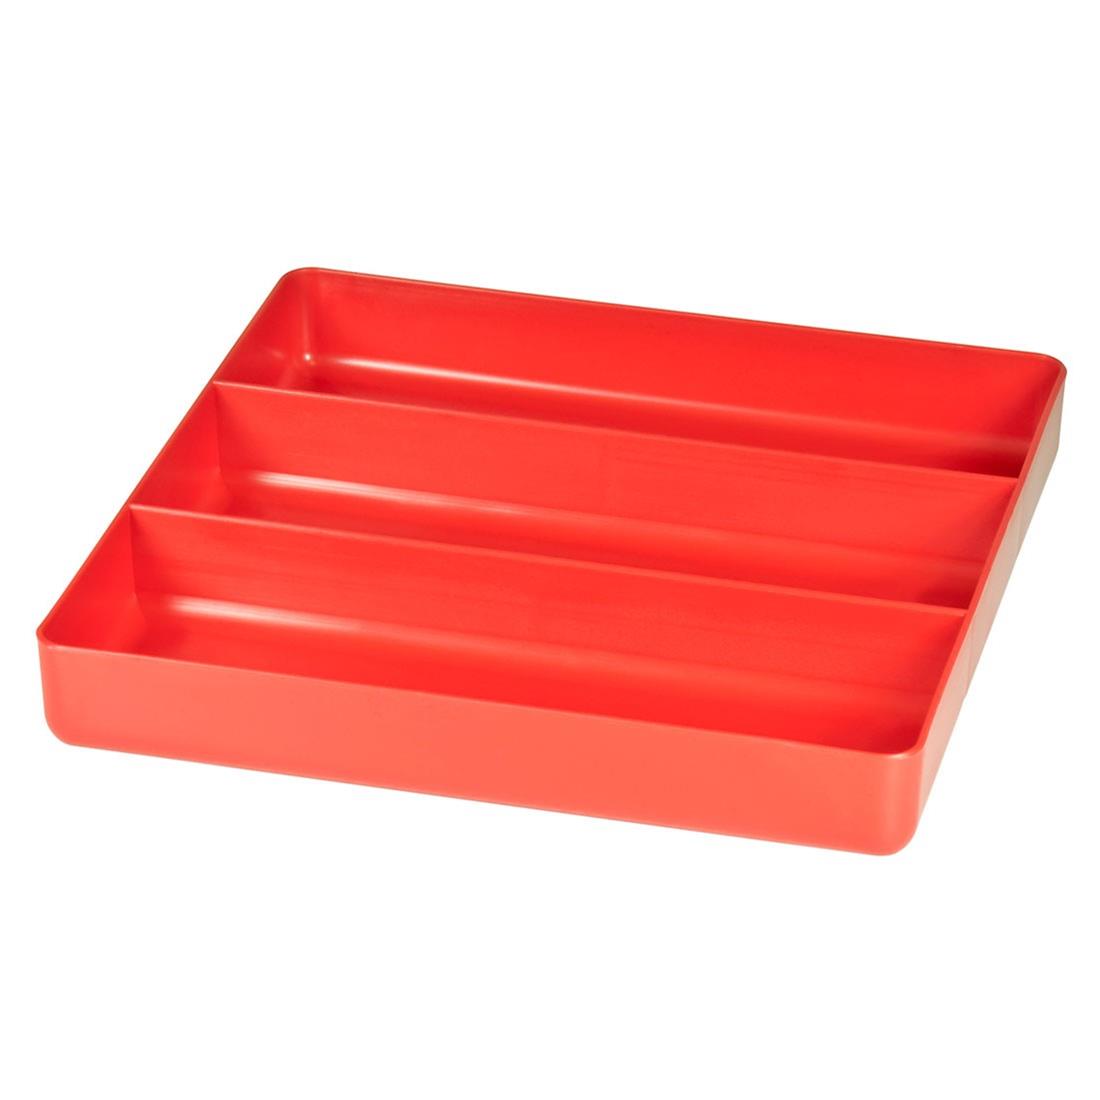 ERNST 5020 3 Compartment Organizer Tray - Red - Jireh Tools